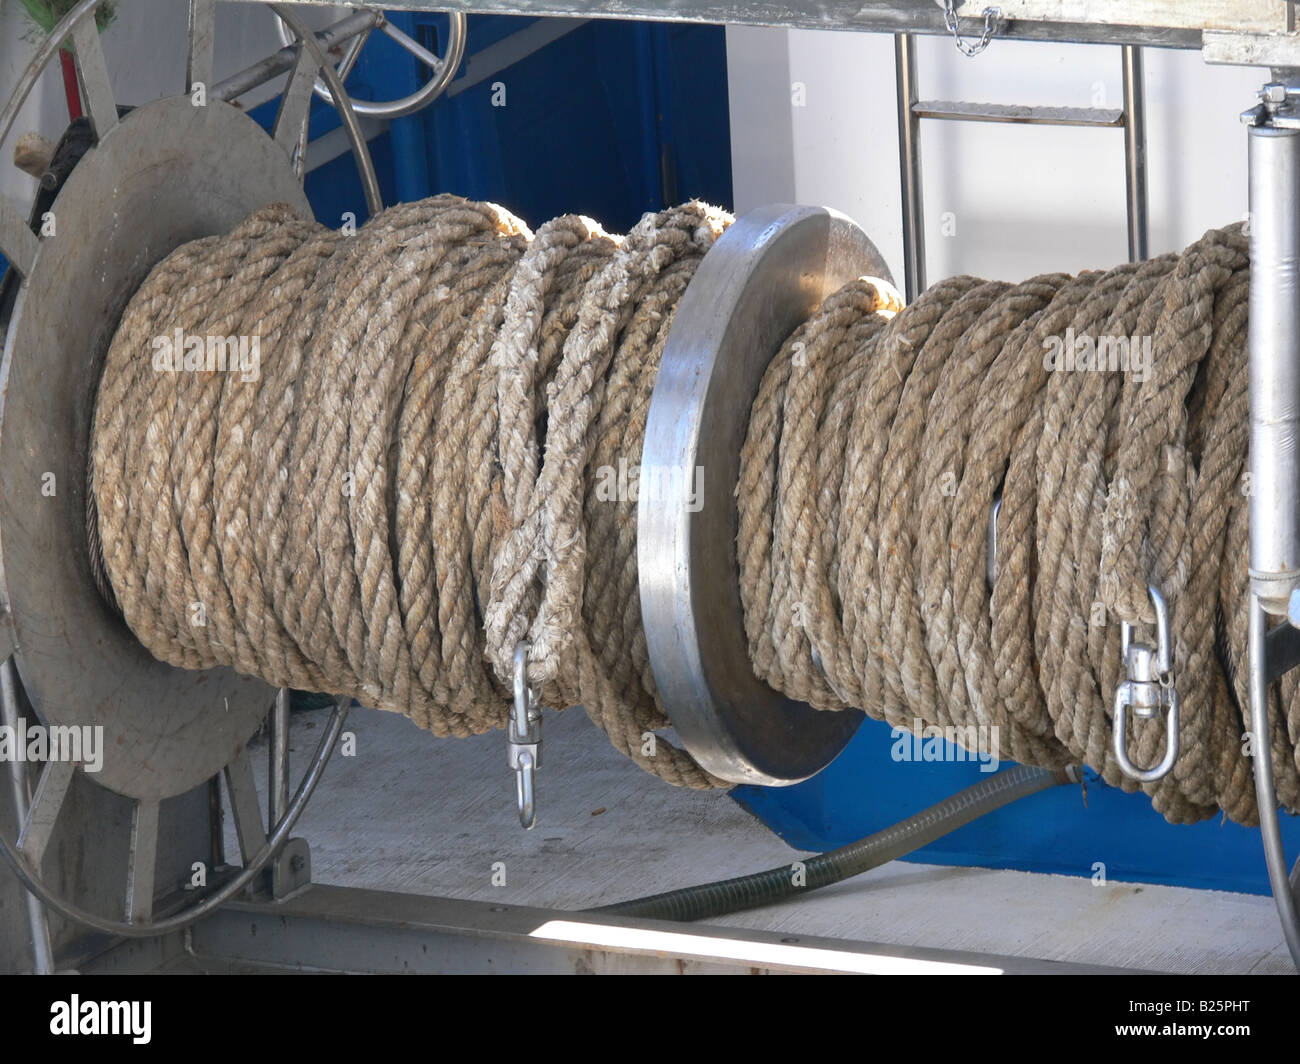 A picture of ropes and nets Stock Photo